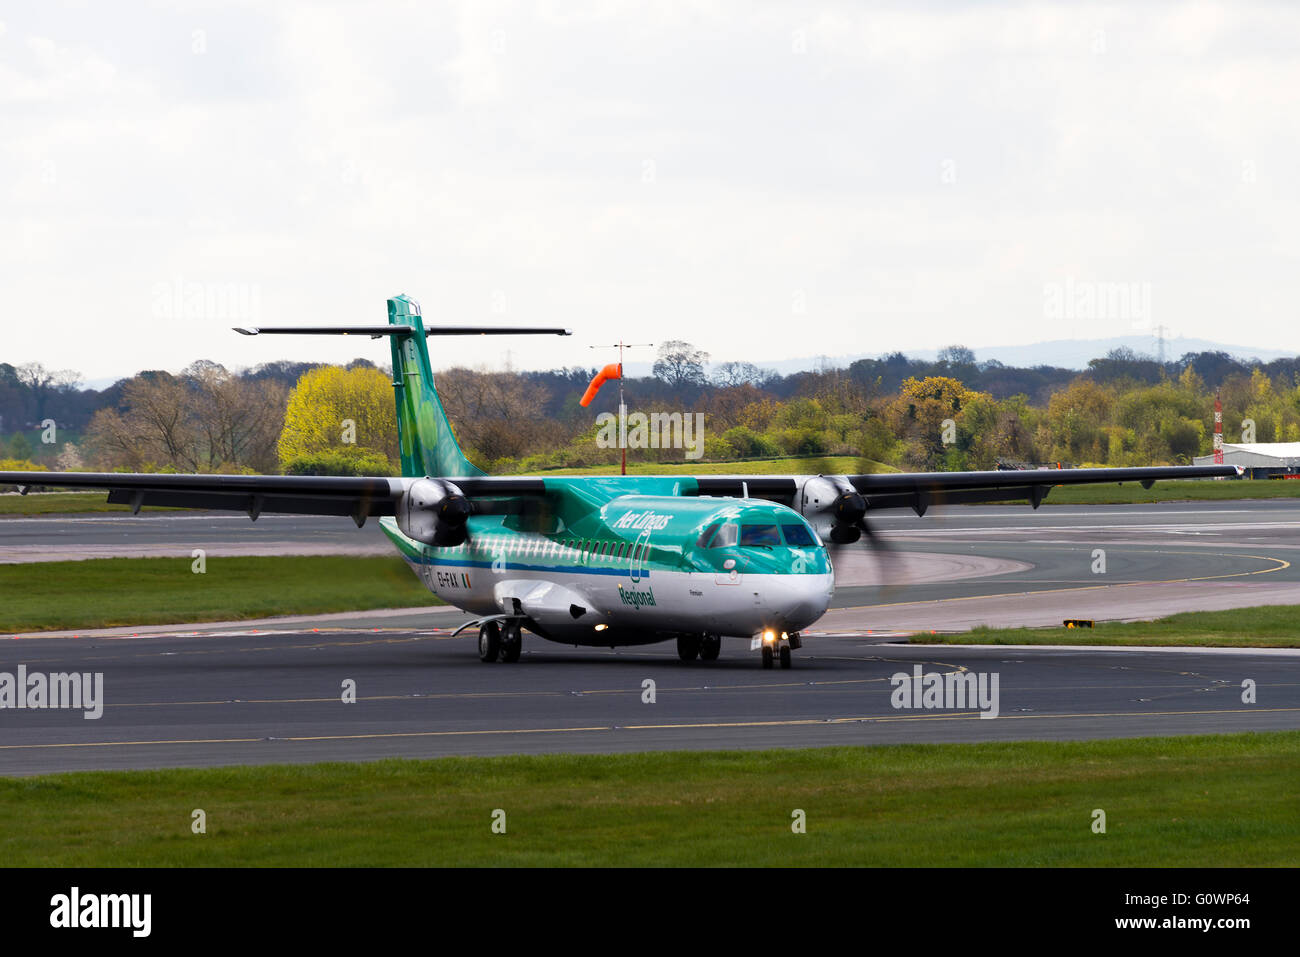 Aer Lingus Regional Airline ATR72-600 Airliner EI-FAX Taxiing at Manchester International Airport England United Kingdom UK Stock Photo